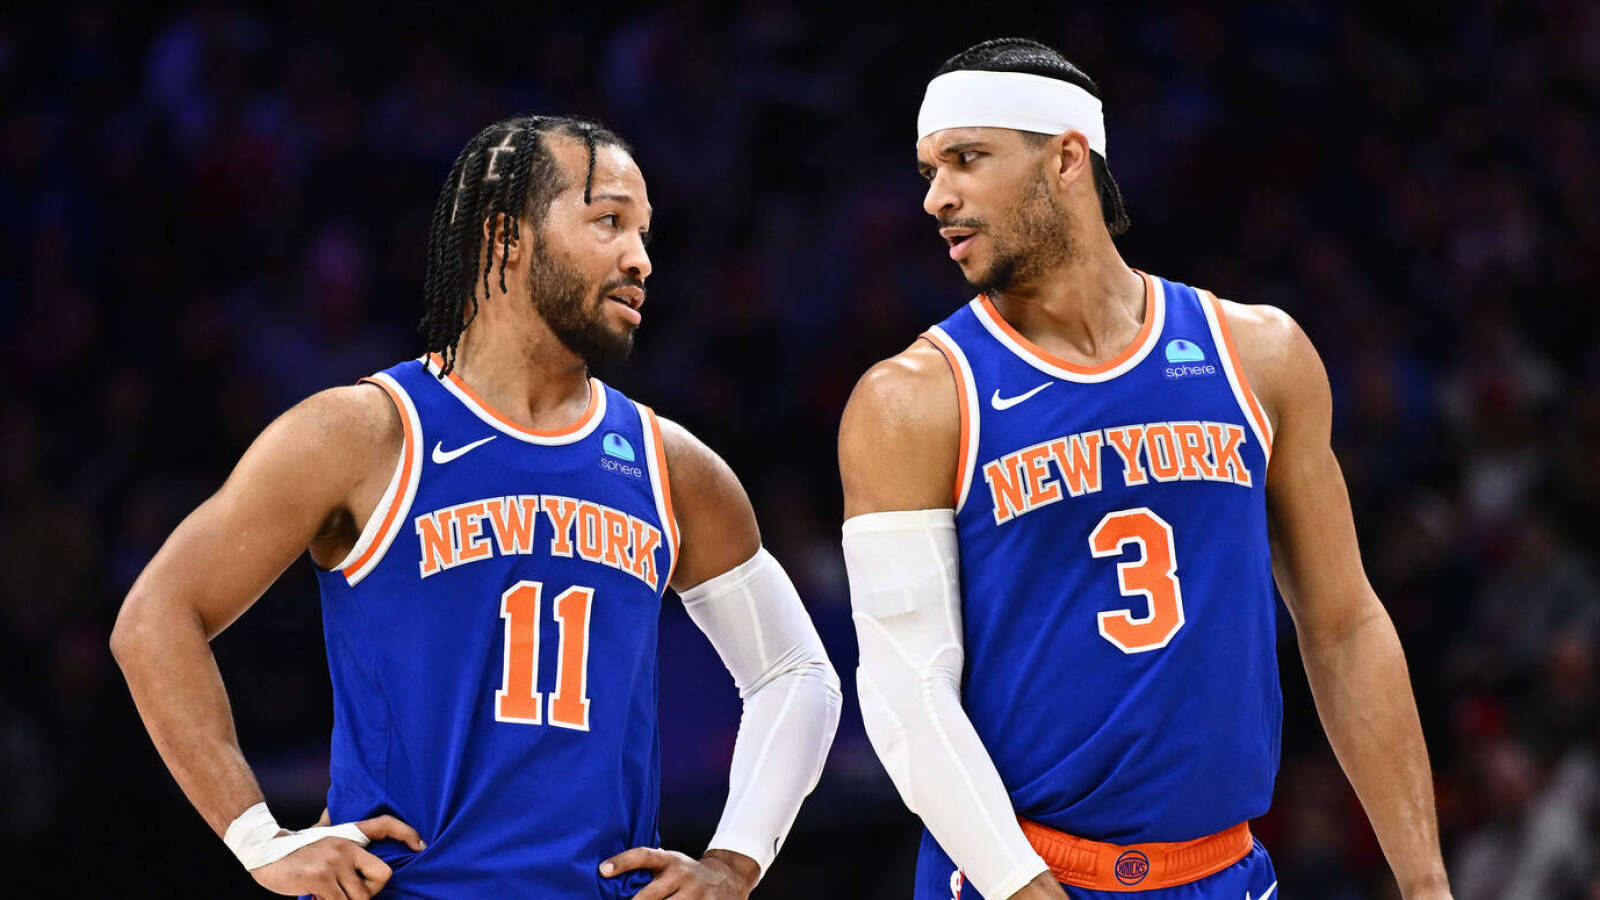 Are the 'Nova Knicks' the new wave of team building?